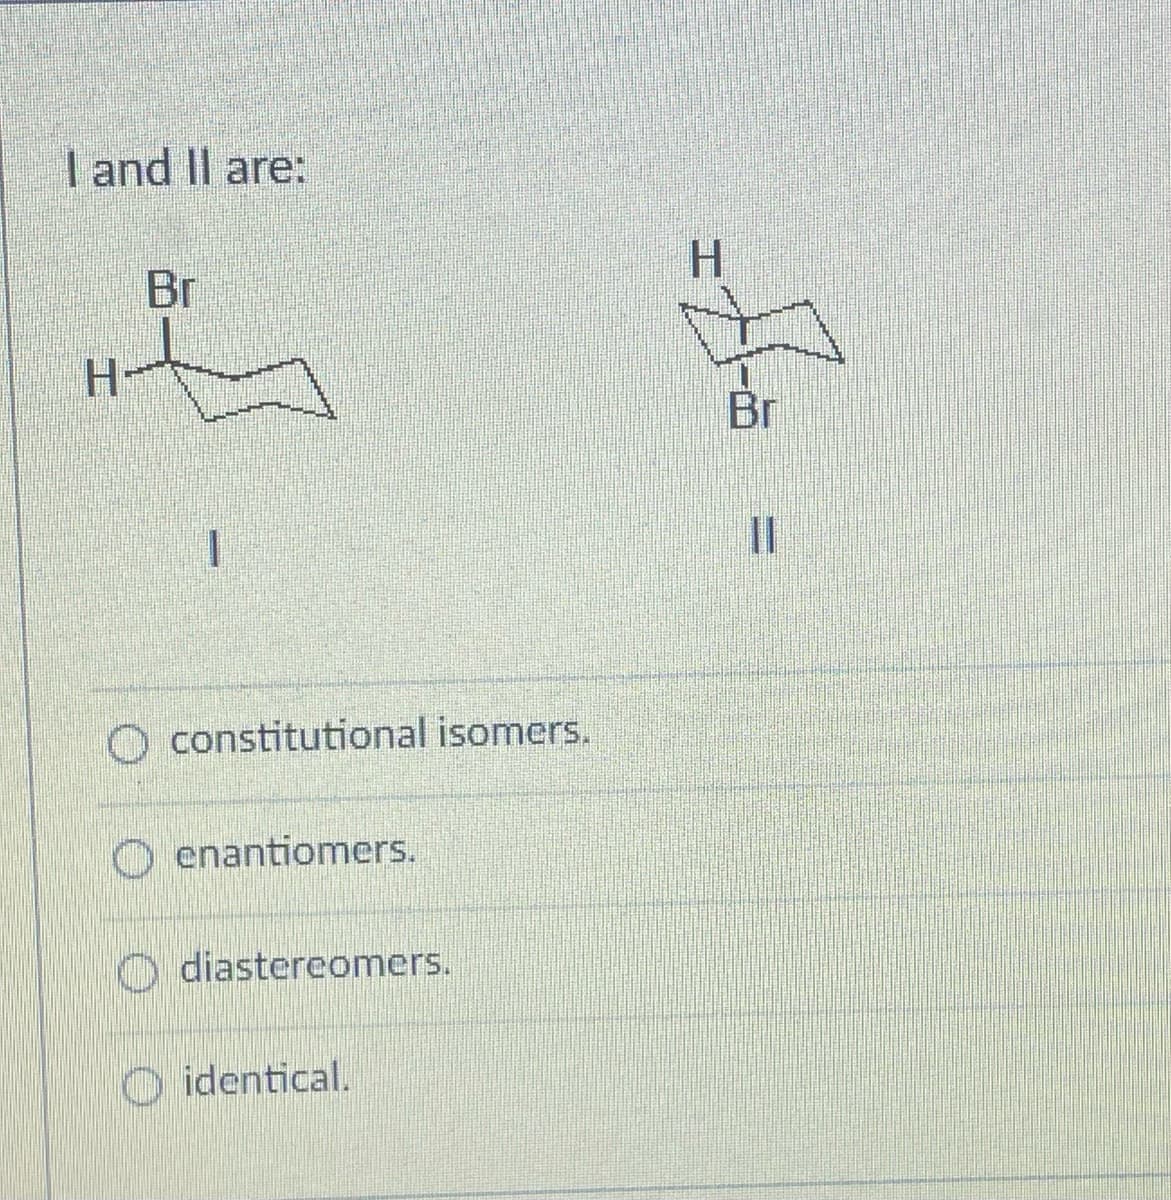 I and II are:
H
Br
O constitutional isomers.
Oenantiomers.
diastereomers.
identical.
H
Br
II